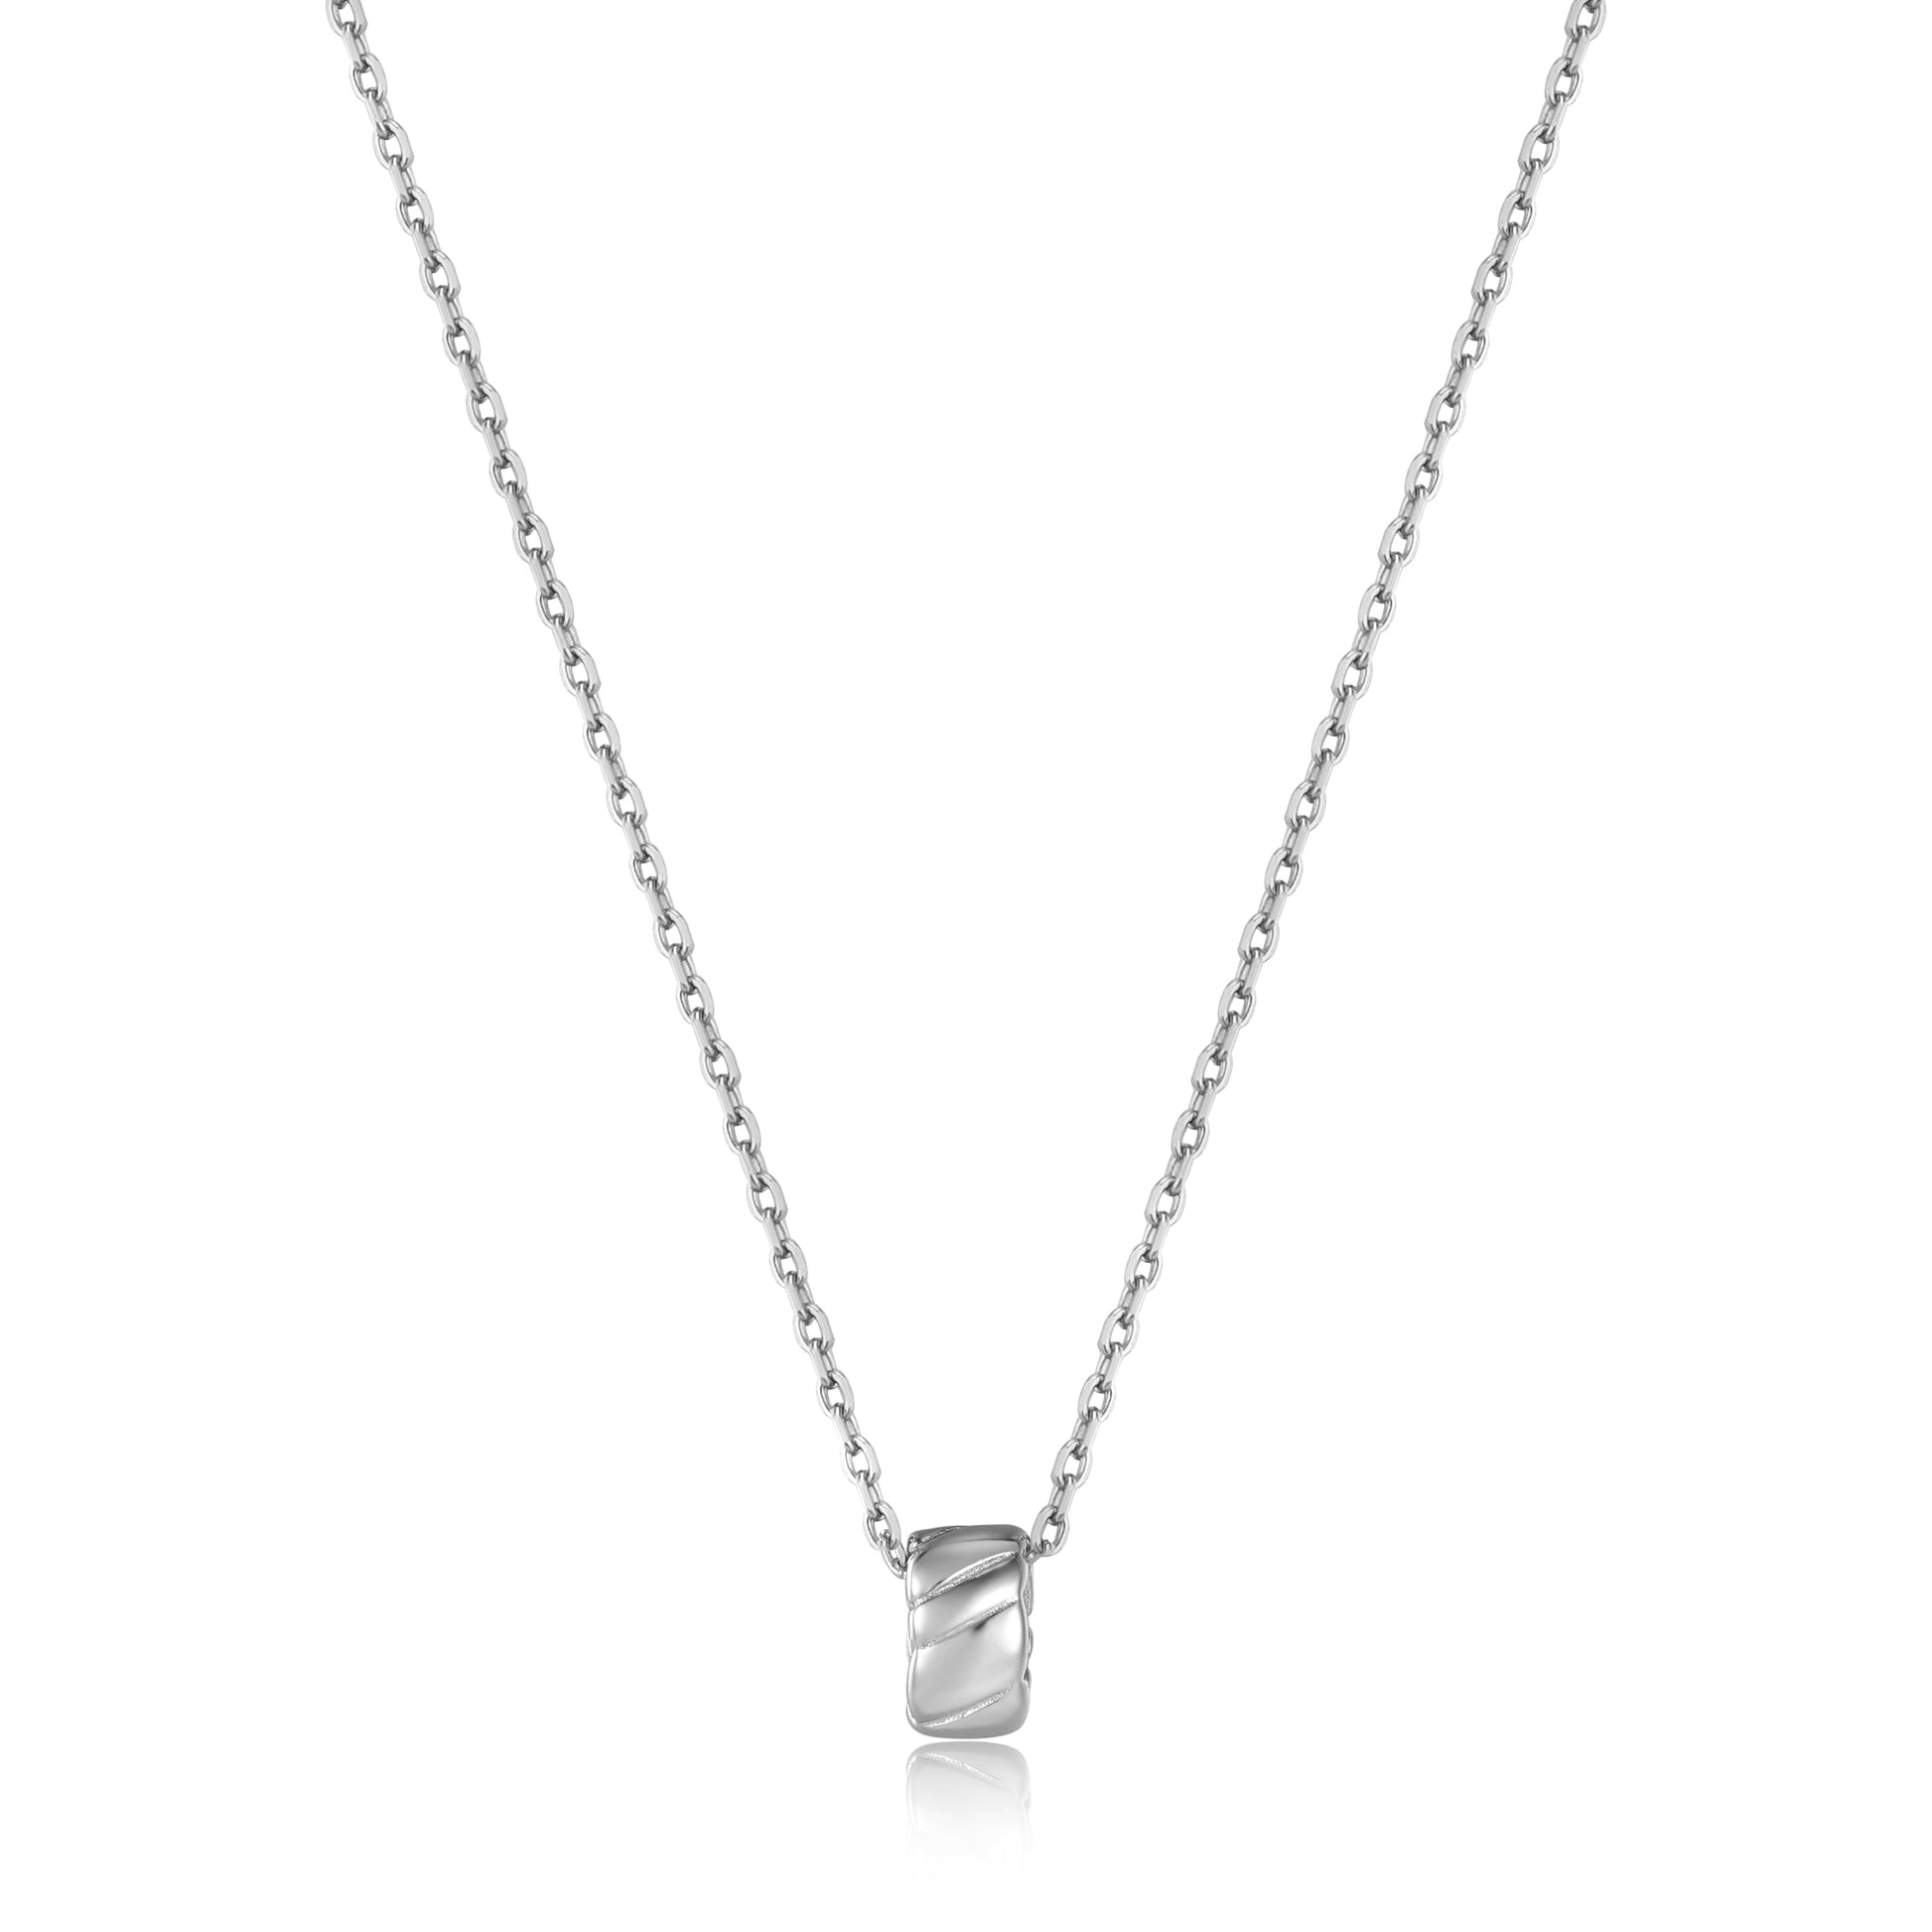 Ania Haie Silver Smooth Twist Pendant Necklace - Silver Necklace